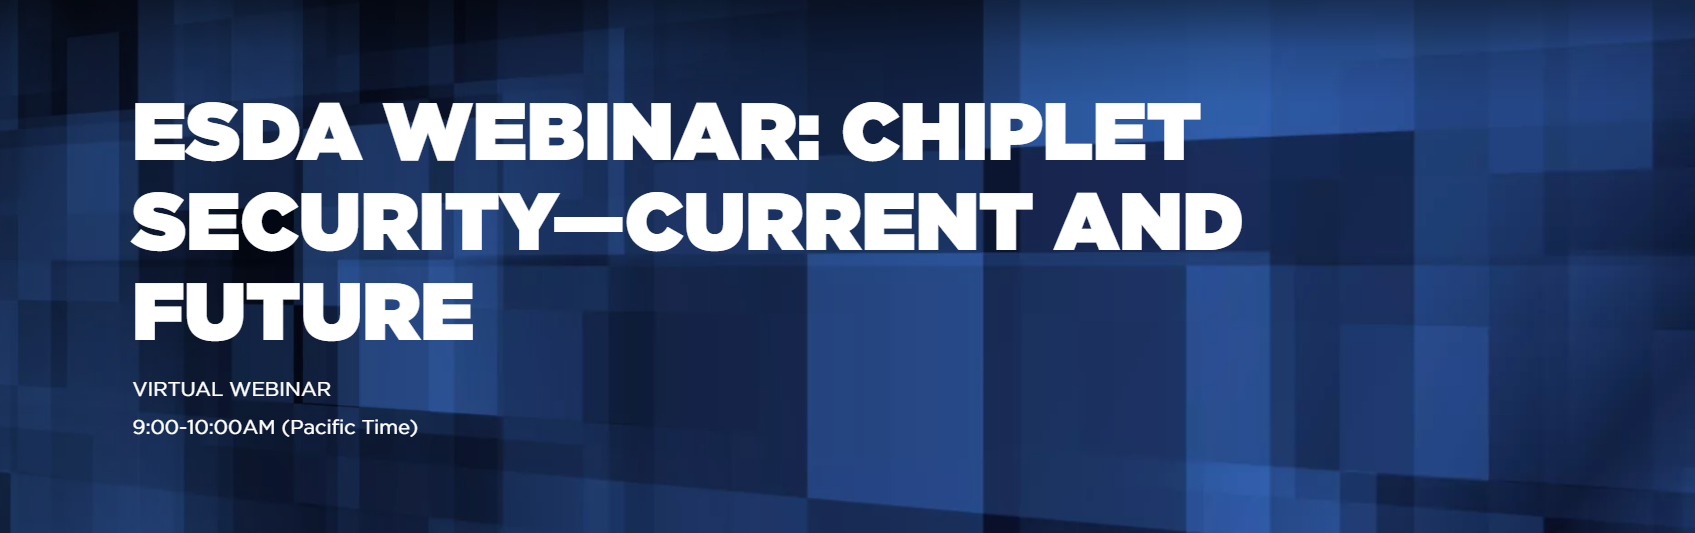 ESDA Webinar: Chiplet Security—Current and Future | SEMI